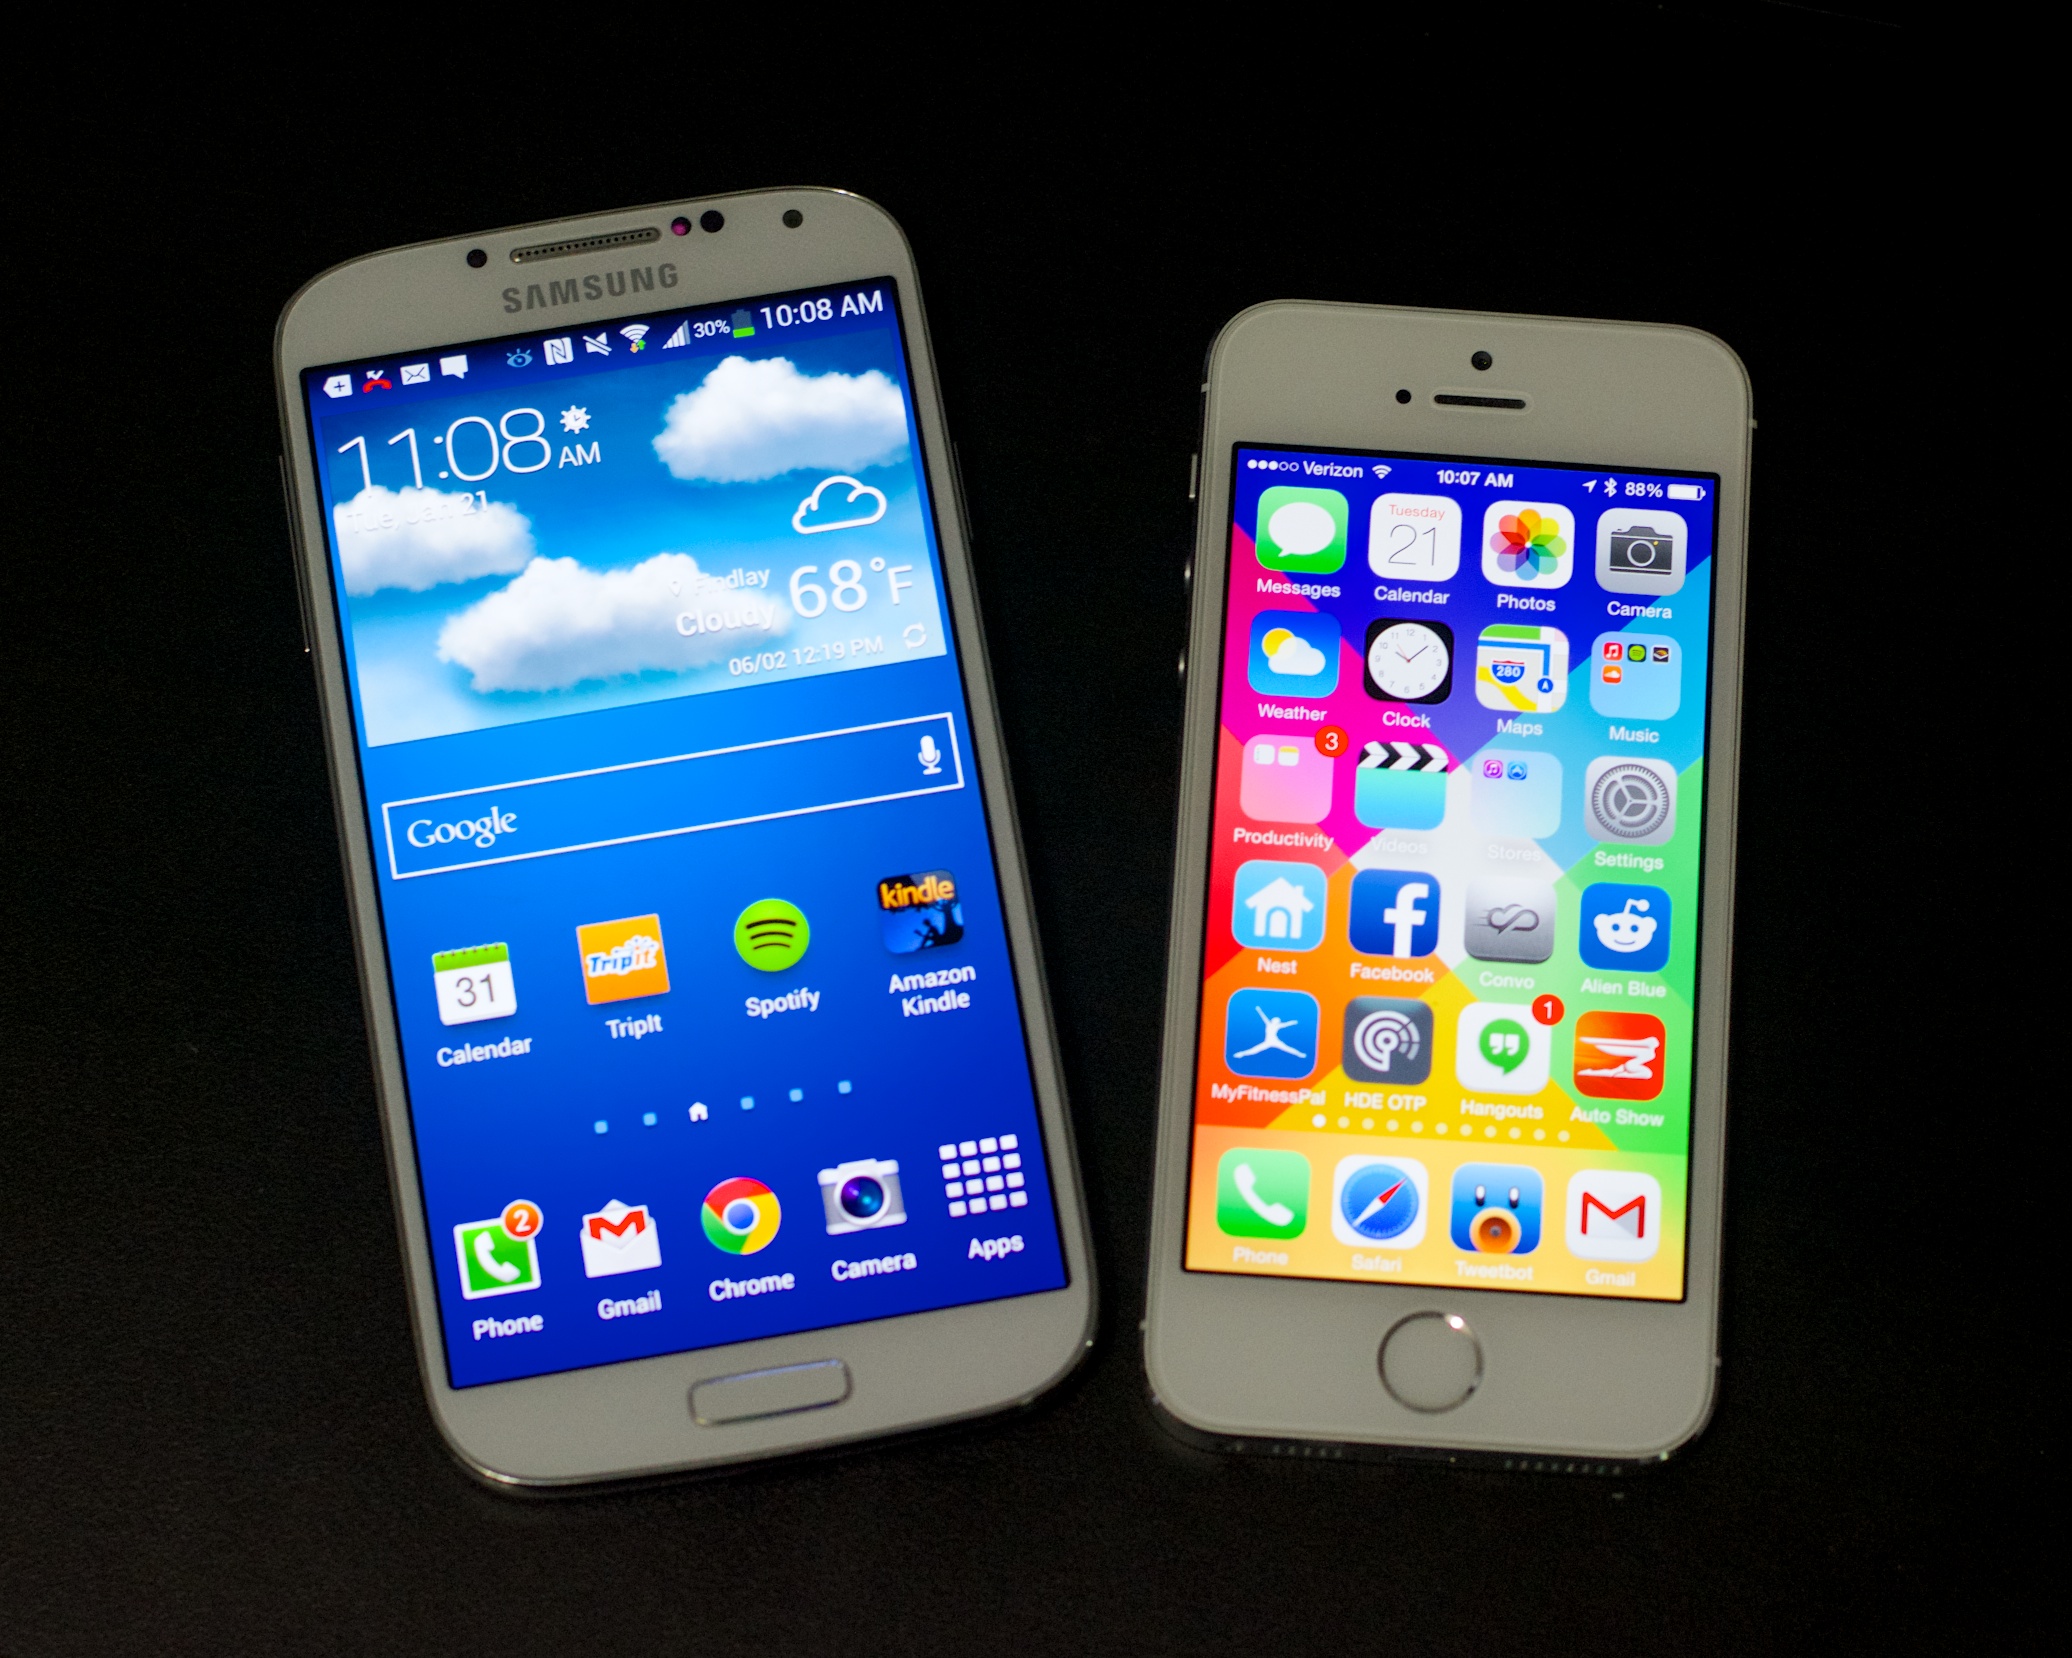 Sources say Apple is planning two iPhone 6 models with larger screens to better compete with the Galaxy S5 and Galaxy Note 4.